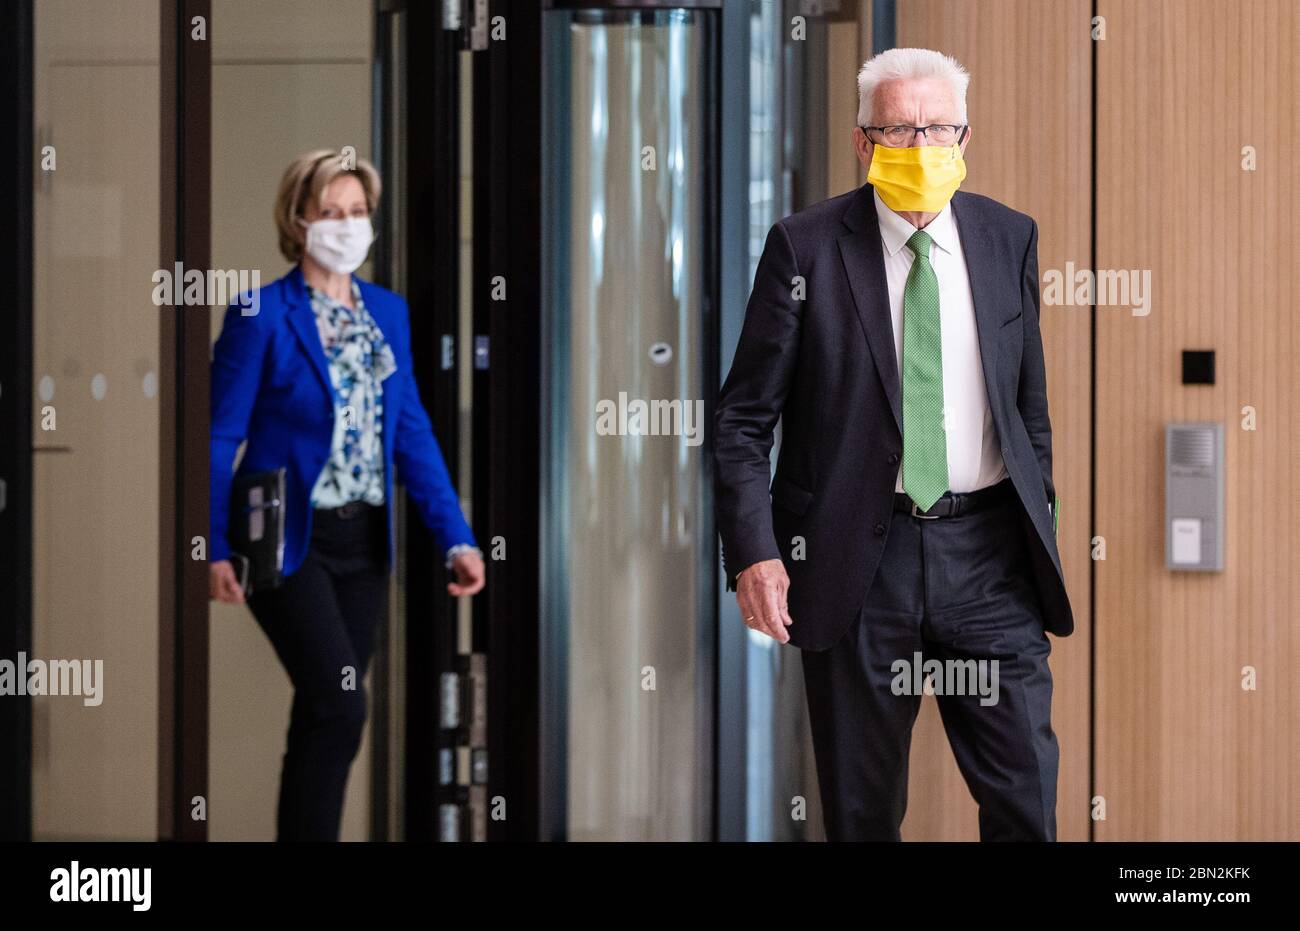 Stuttgart, Germany. 12th May, 2020. Winfried Kretschmann (r, Bündnis 90/Die Grünen), Prime Minister of Baden-Württemberg, followed by Baden-Württemberg's Minister of Economics Nicole Hoffmeister-Kraut (CDU), goes to a government press conference. At the press conference, the state government announced new aid for medium-sized businesses. Credit: Christoph Schmidt/dpa/Alamy Live News Stock Photo